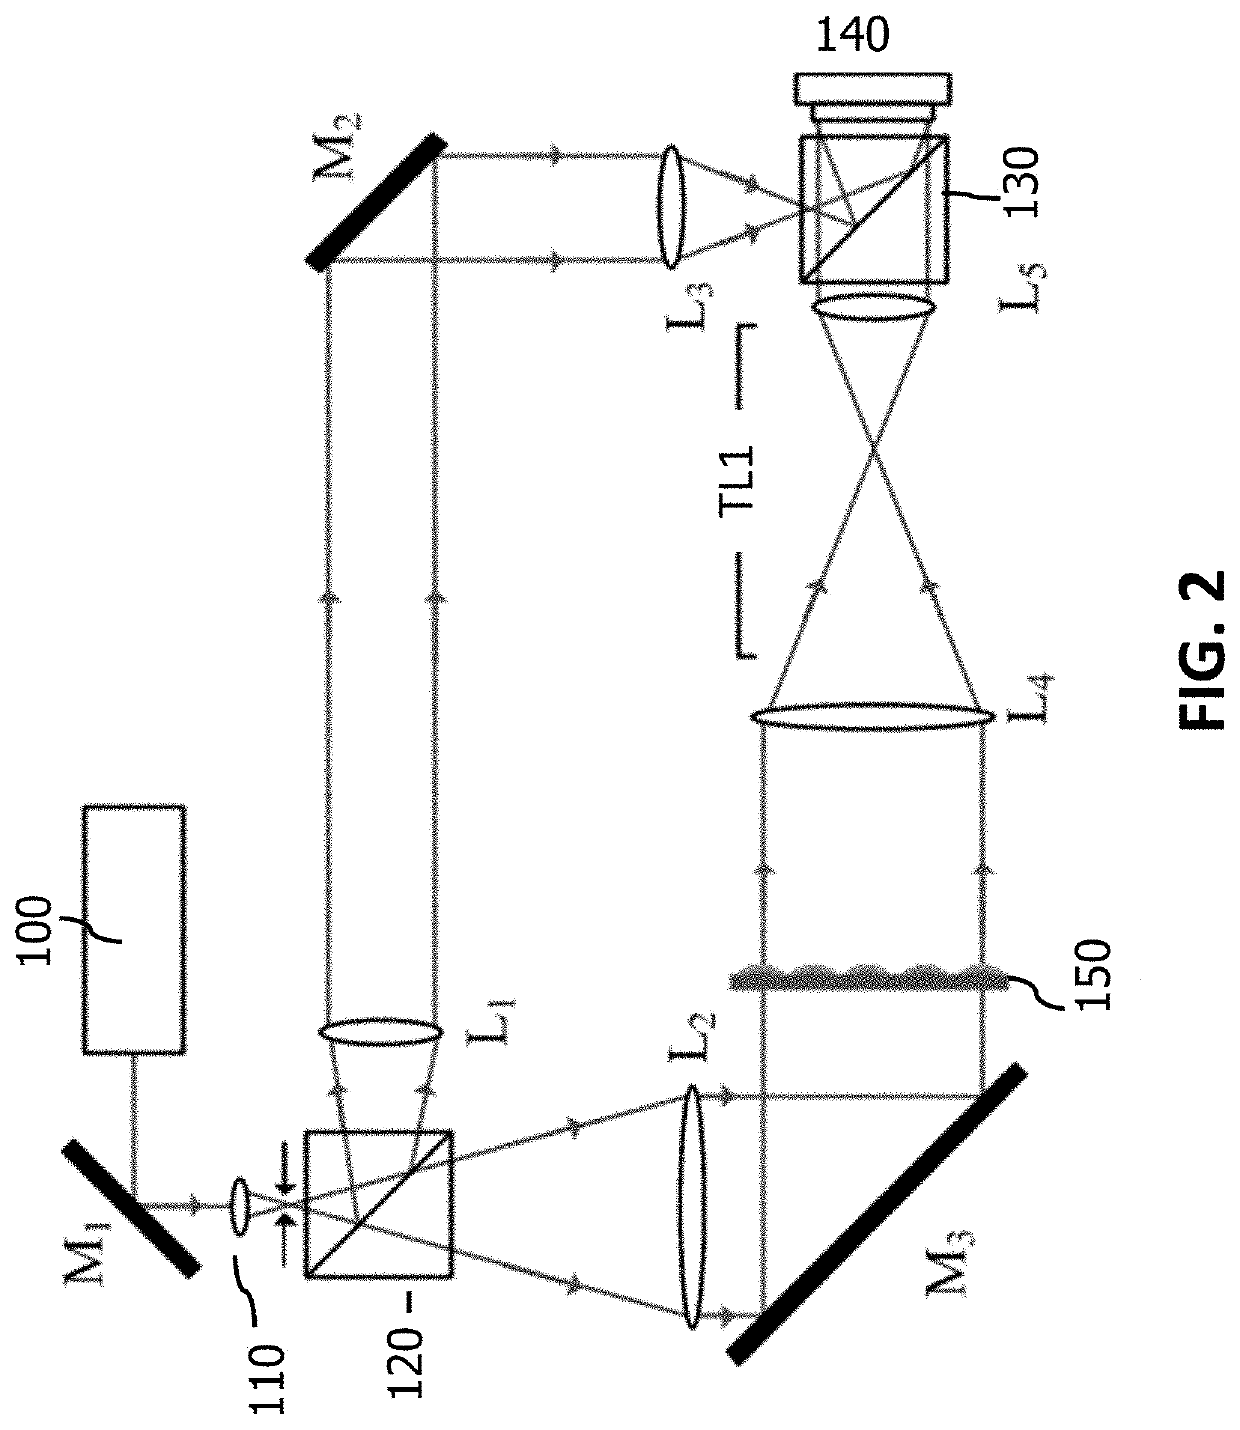 Complex defect diffraction model and method for defect inspection of transparent substrate